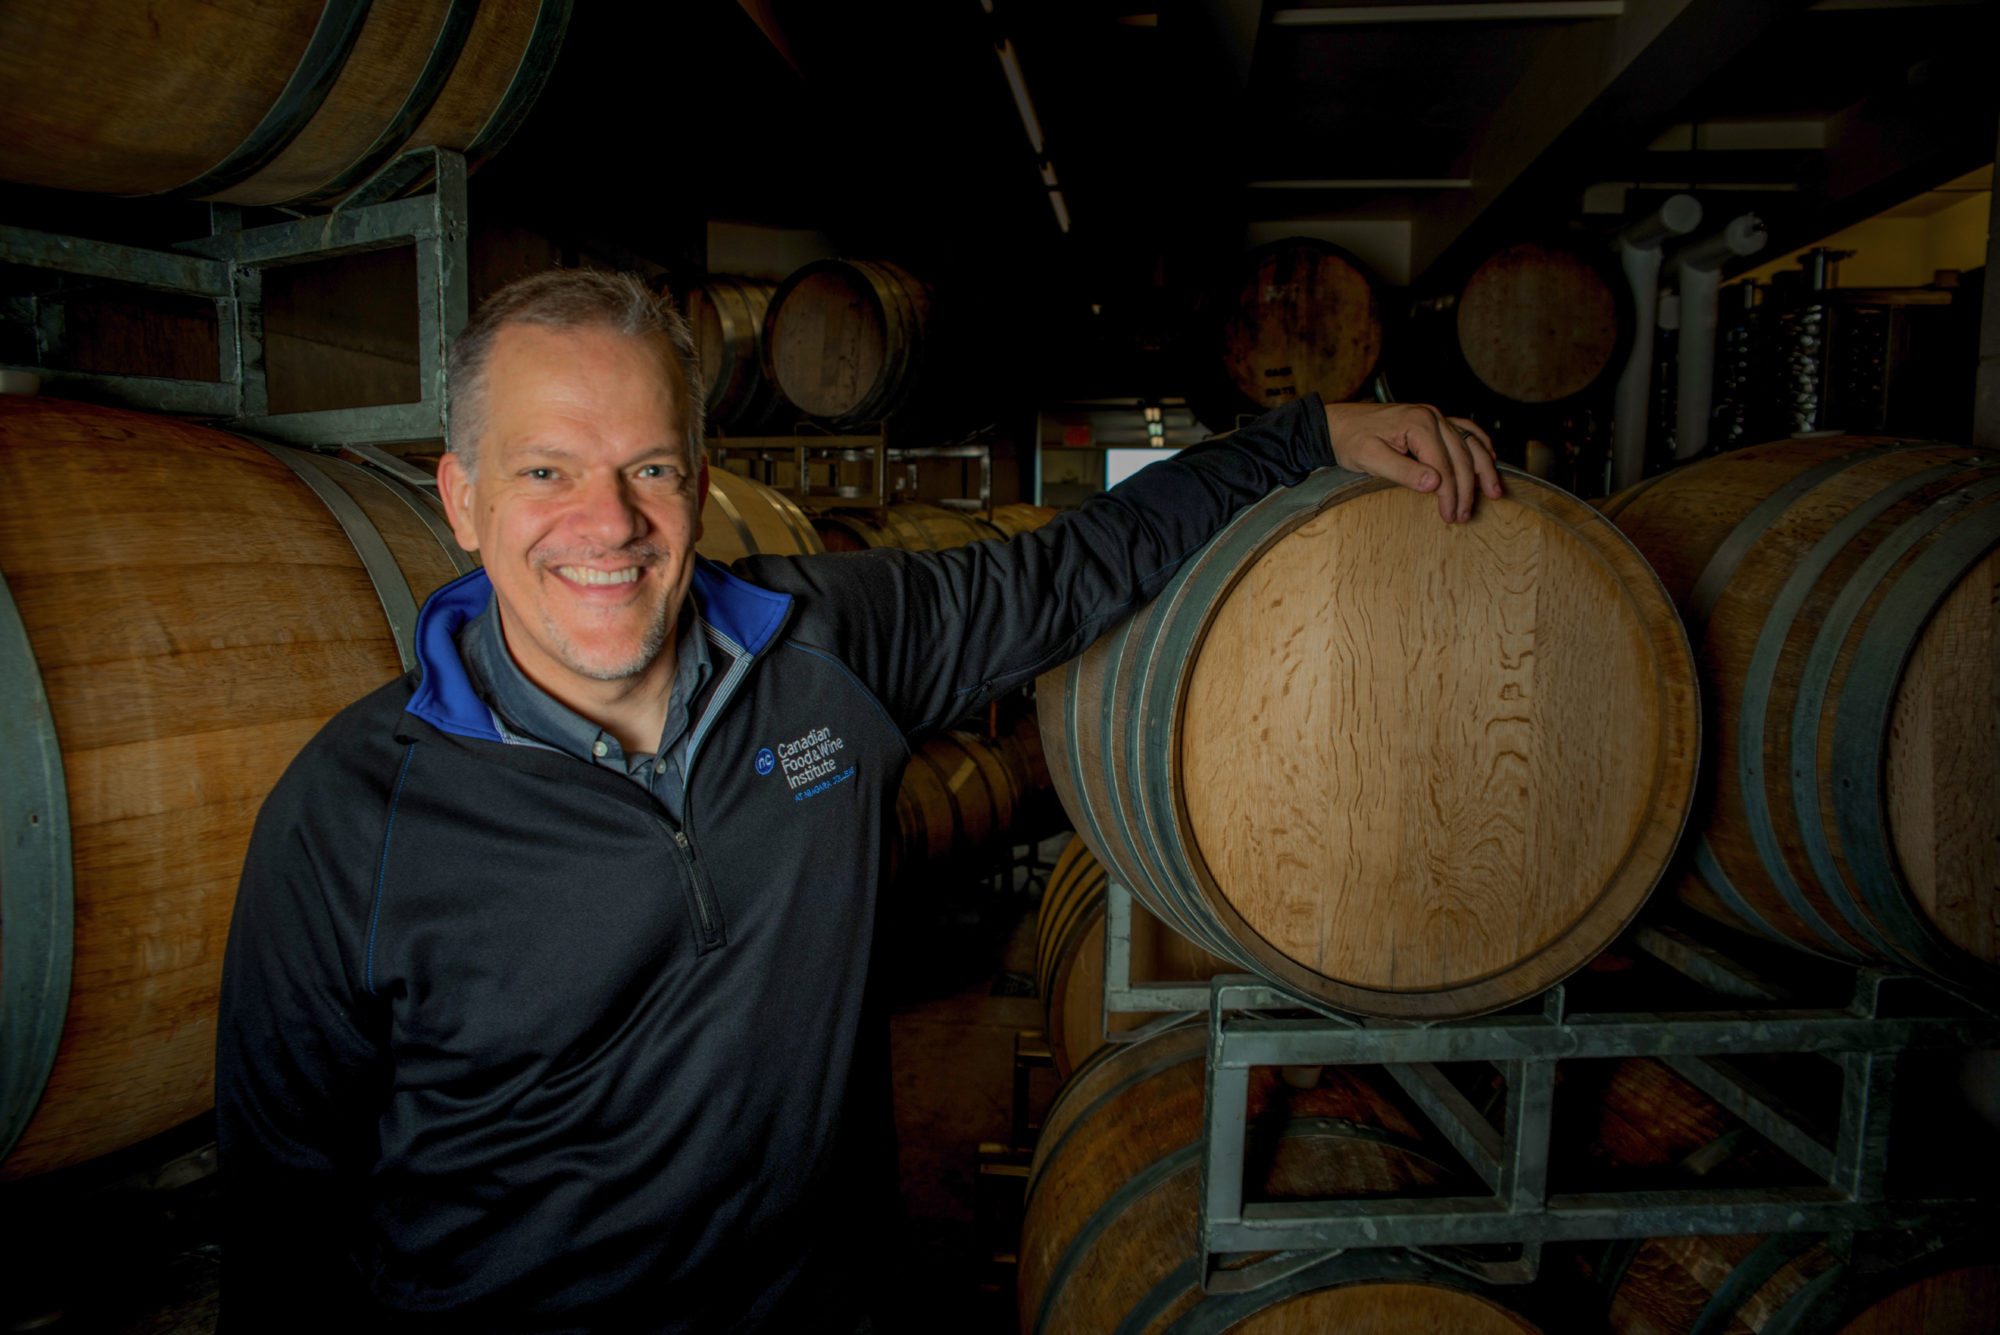 A man leans on a wine barrel and smiles.